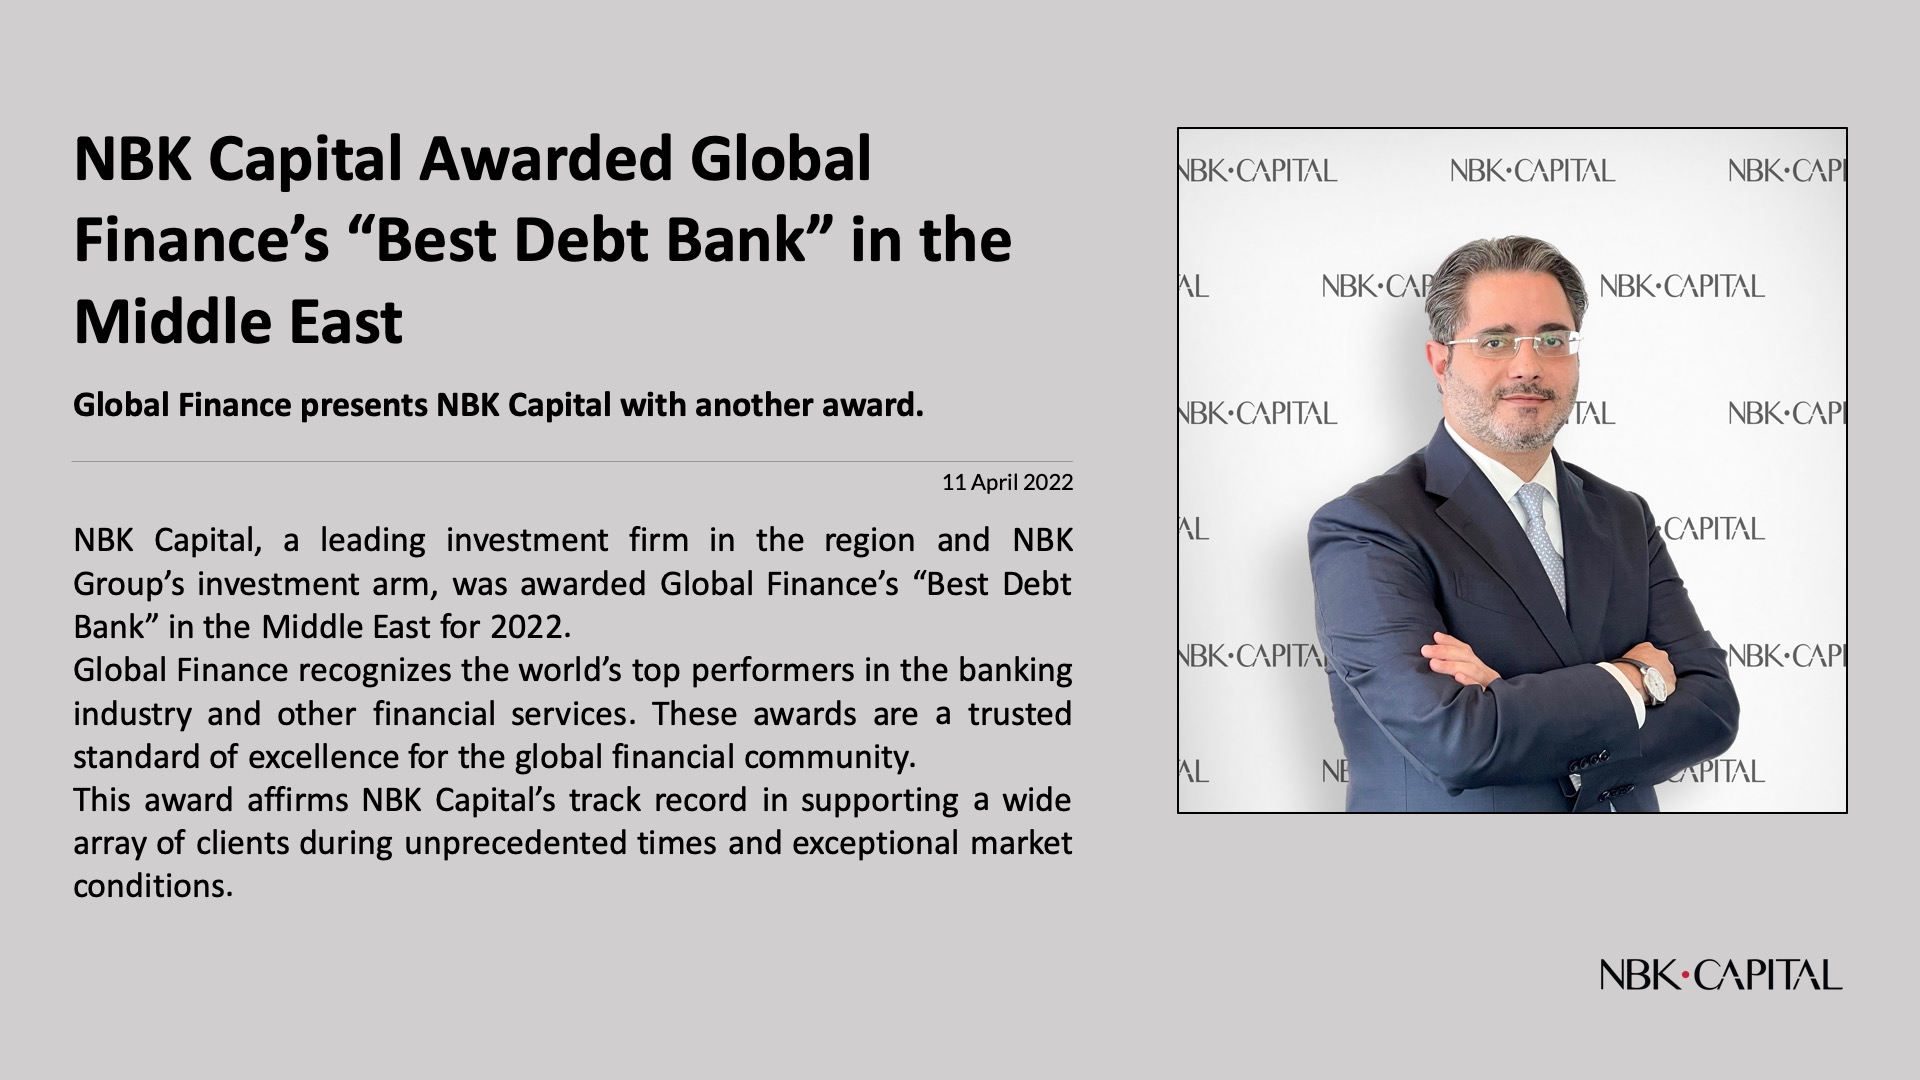 NBK Capital Awarded Global Finance’s “Best Debt Bank” in the Middle East